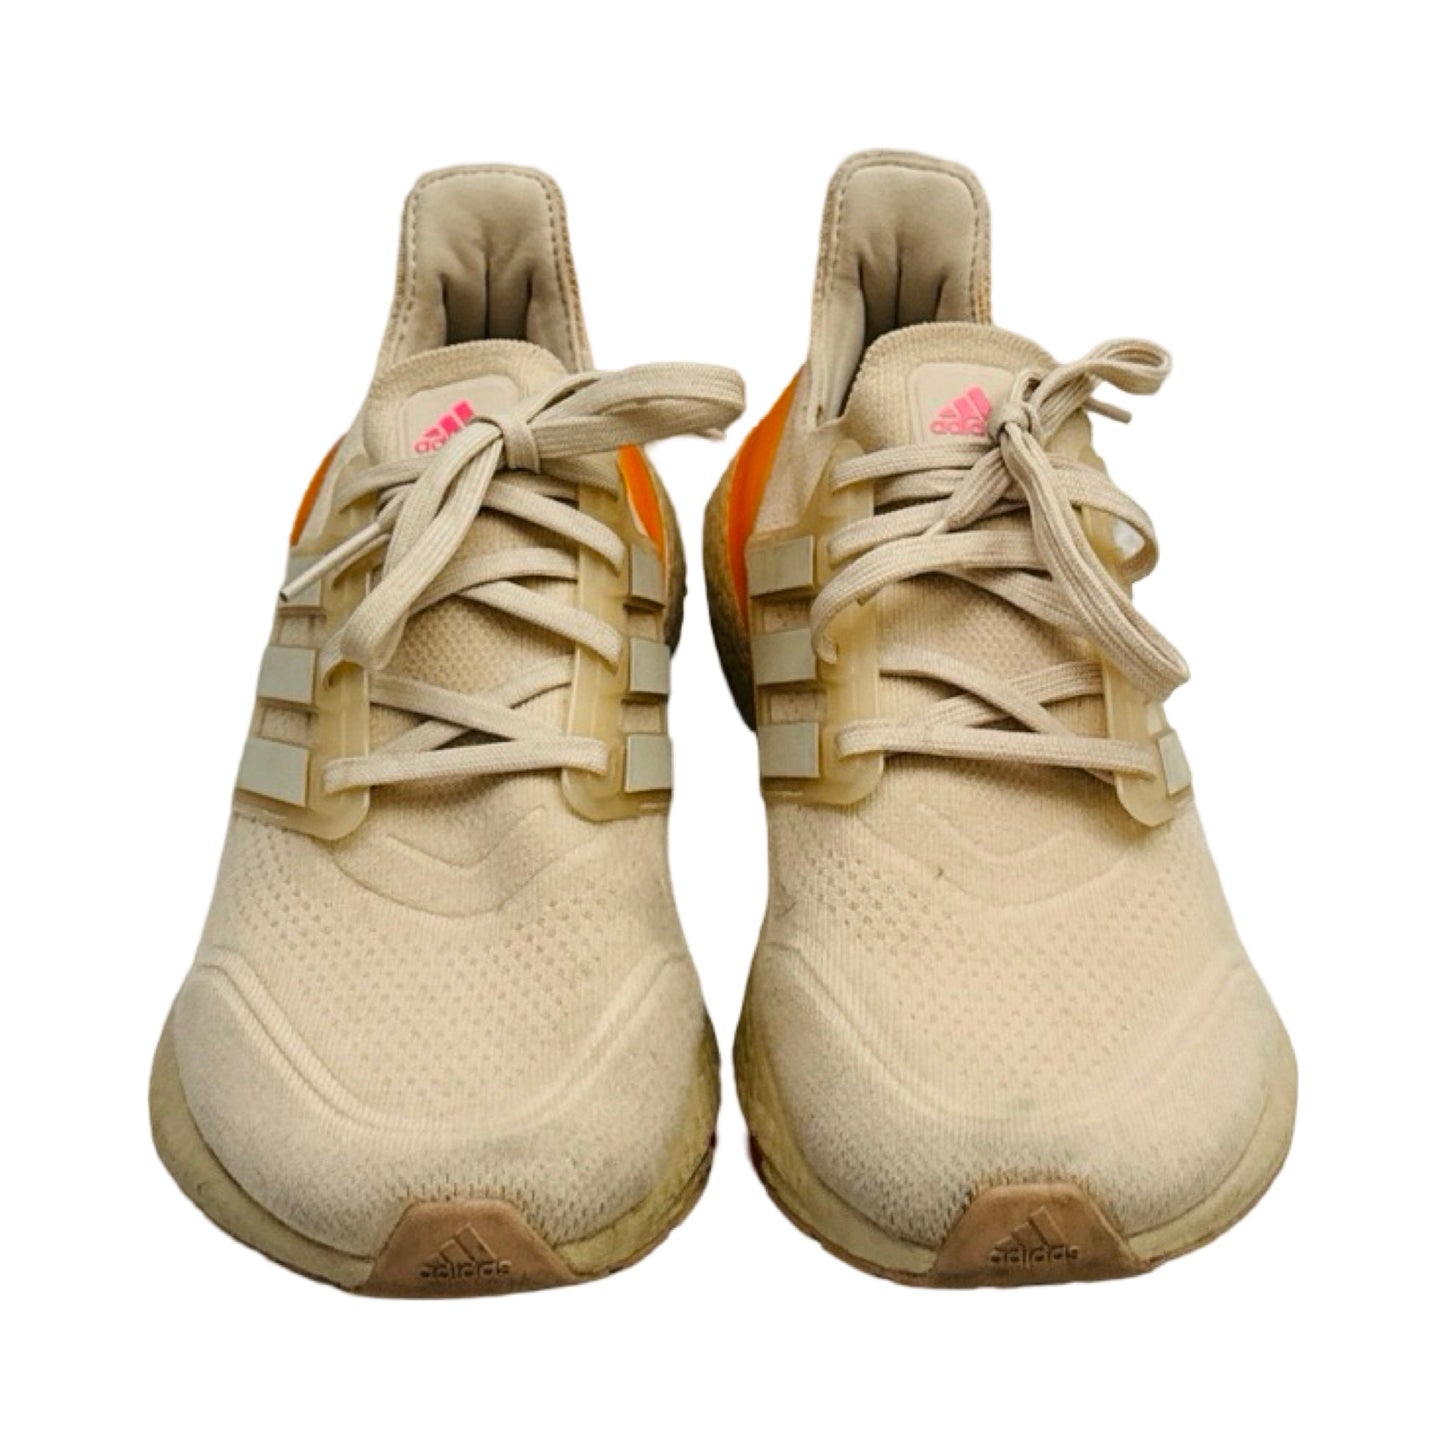 Shoes Sneakers By Adidas  Size: 10.5